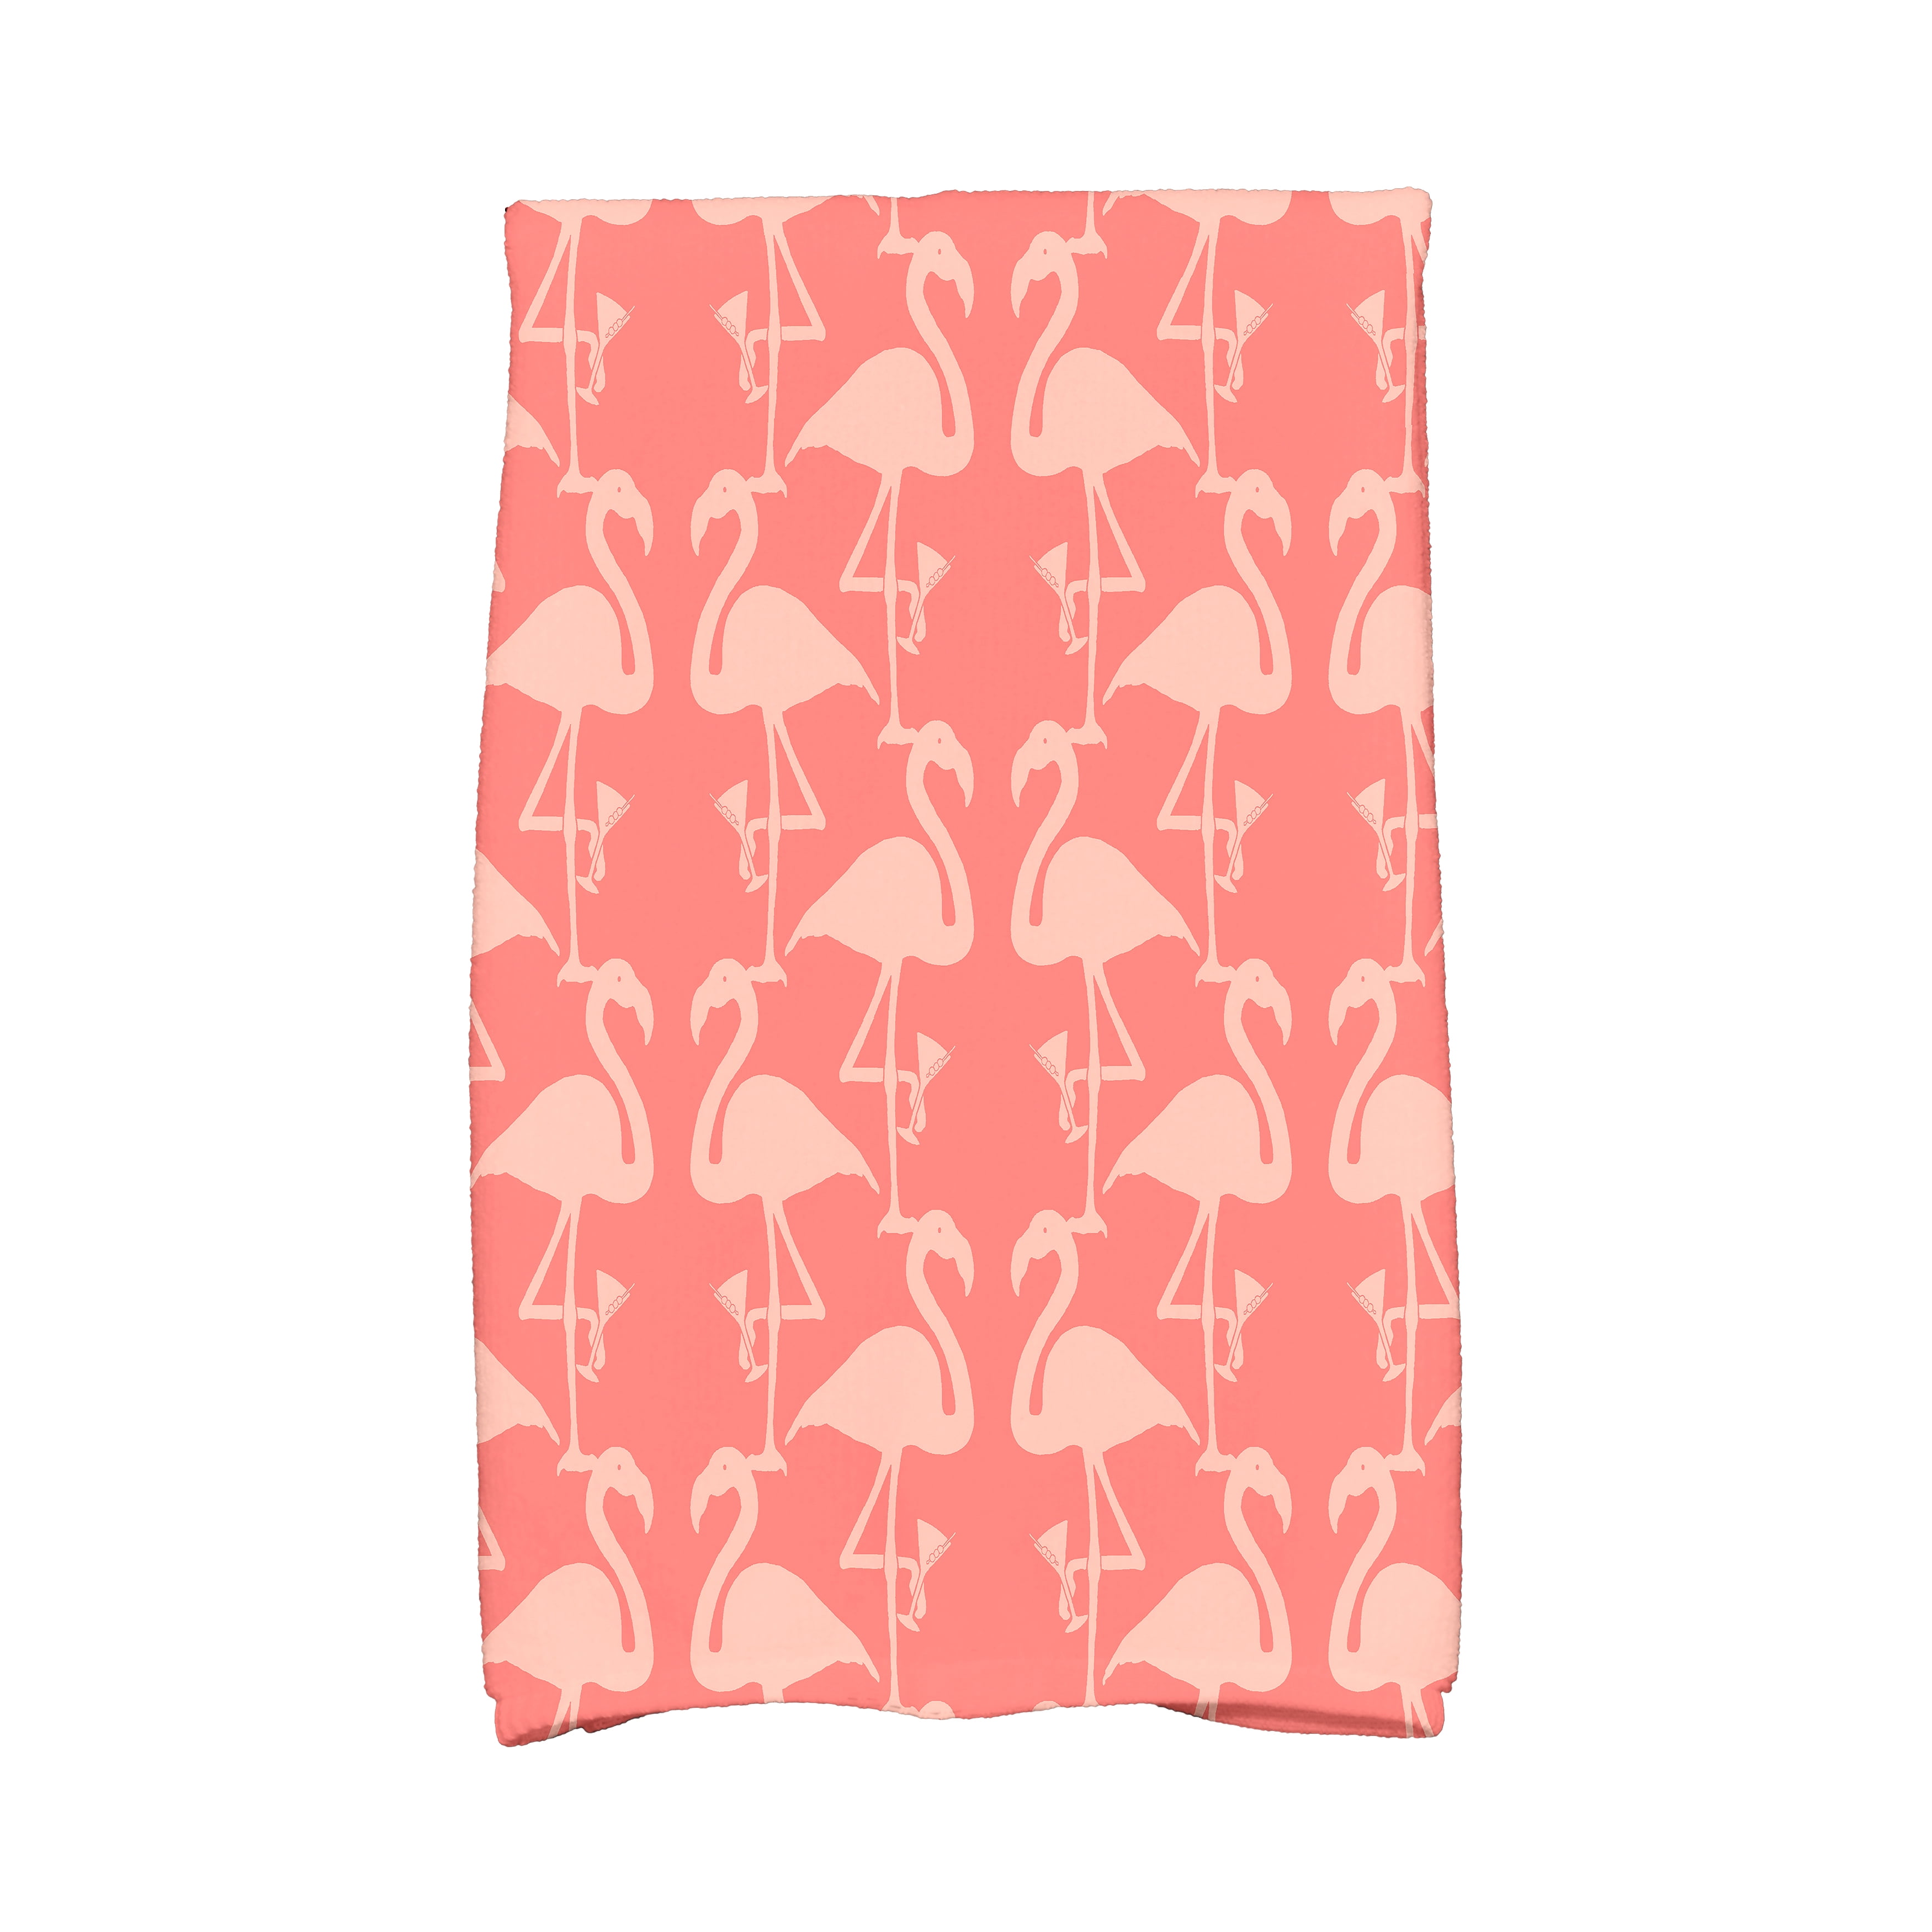 Kitchen TOWEL Pink Flamingos Green Palm Leaves 15"x25" NEW 